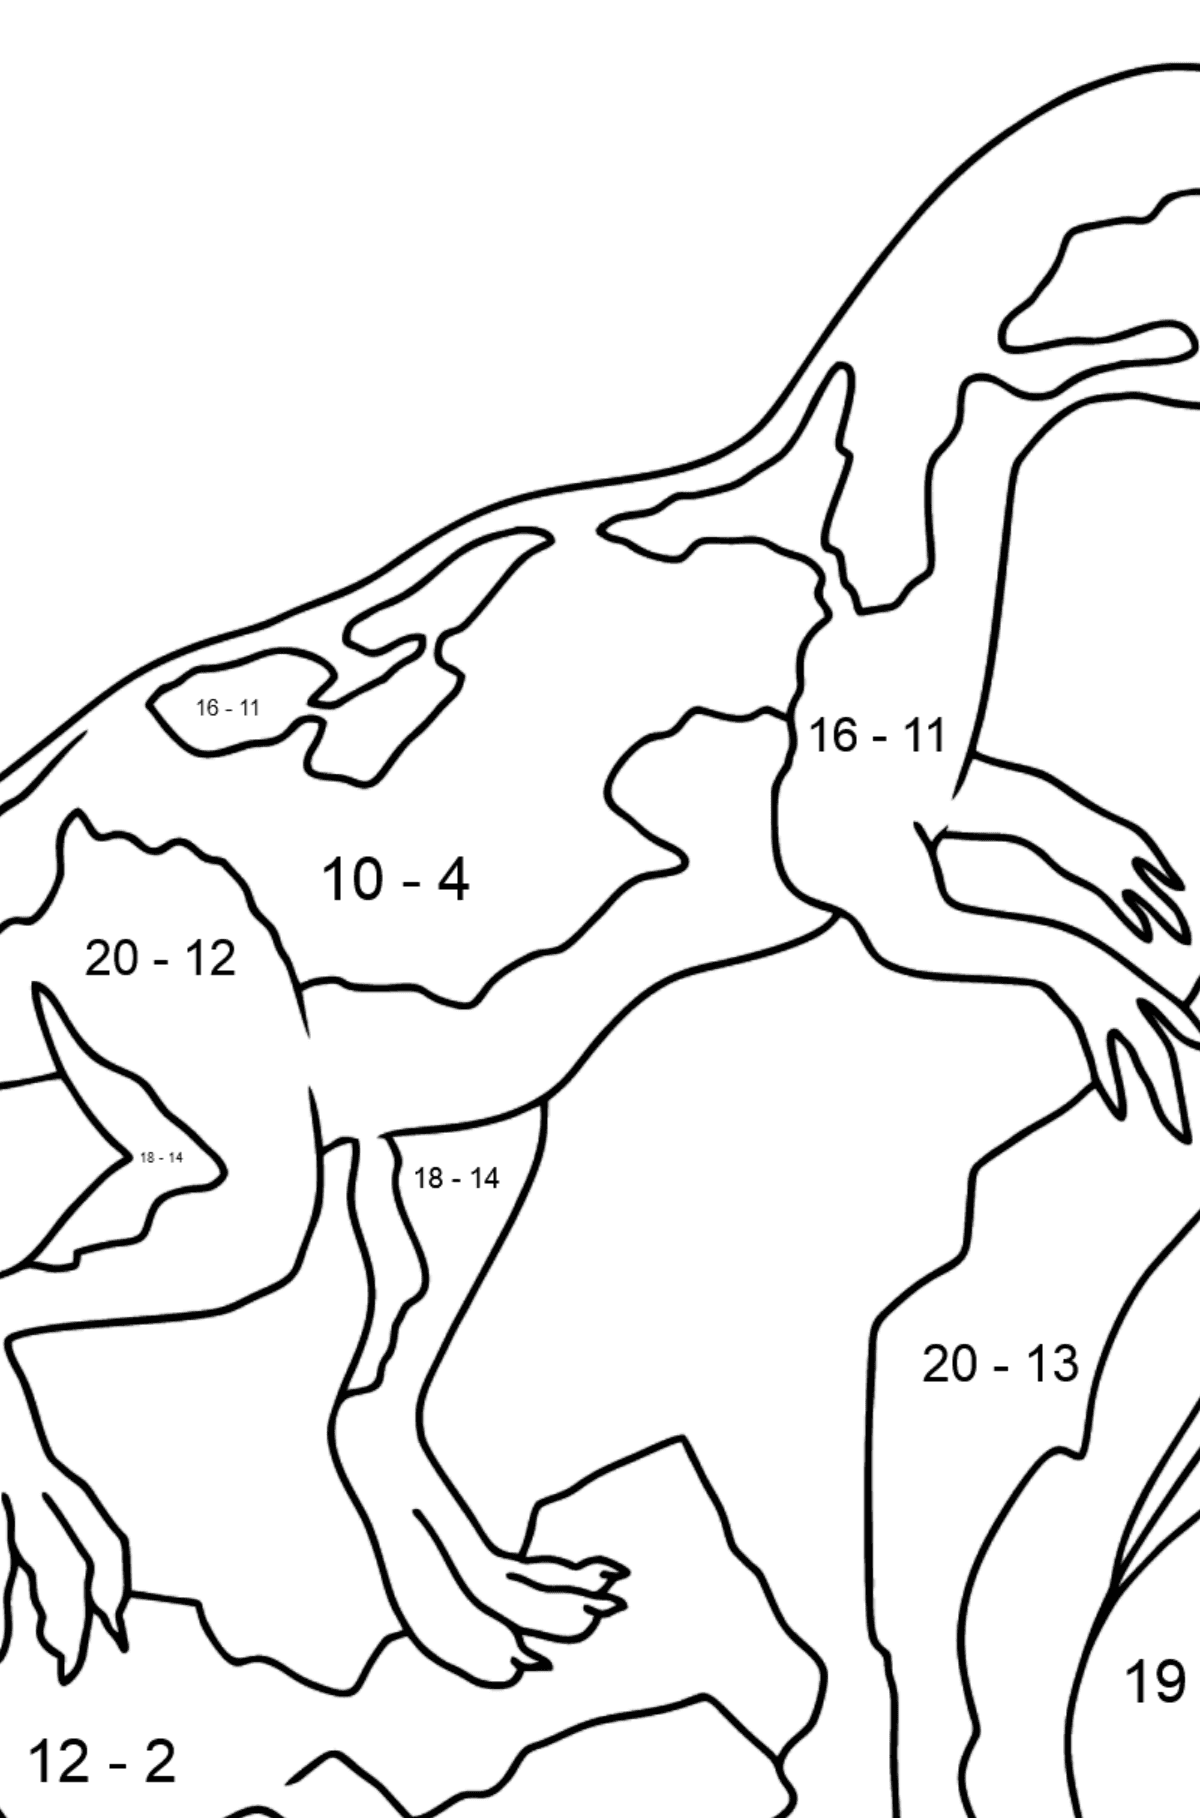 Coloring Page - Allosaurus - Jurassic Dinosaur - Math Coloring - Subtraction for Kids